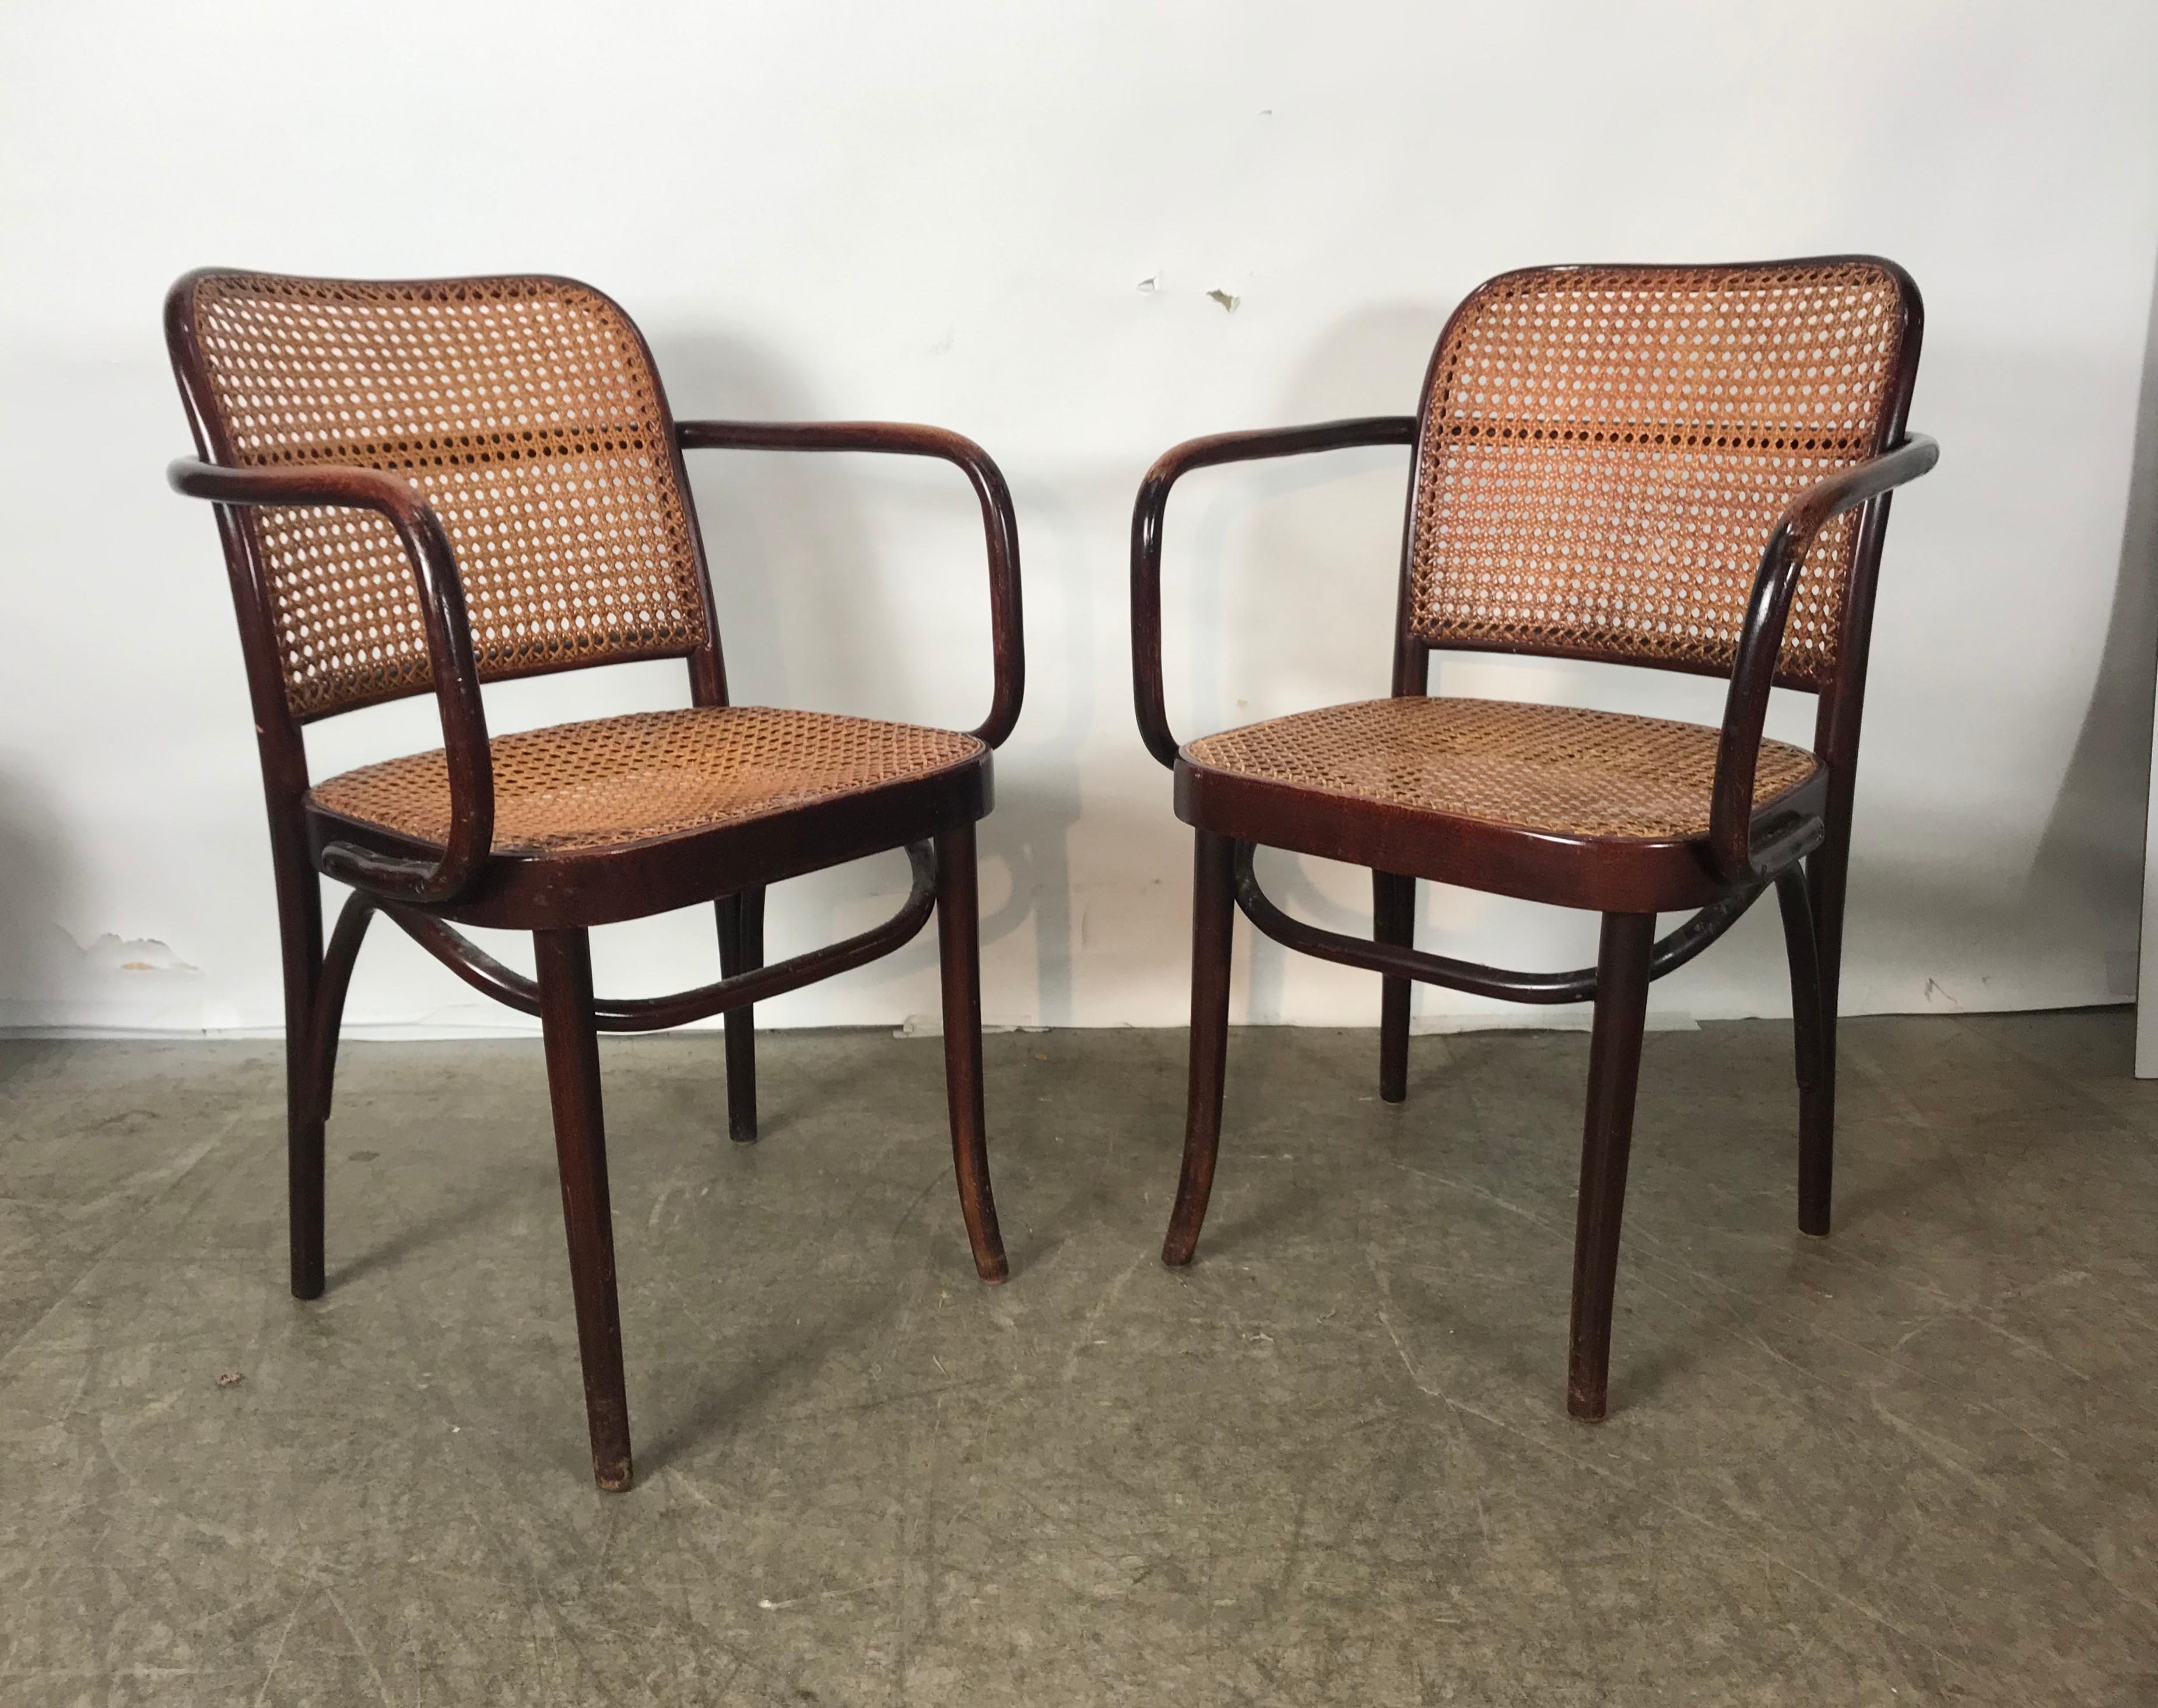 Classic set of wood and cane dining chairs originally designed in 1905 by Josef Hoffmann, set featuring 2-arm chairs and 6 side chairs, some chairs retain original FMG Poland label, nice worn patina, my guess is they date circa 1960s, 1970s.